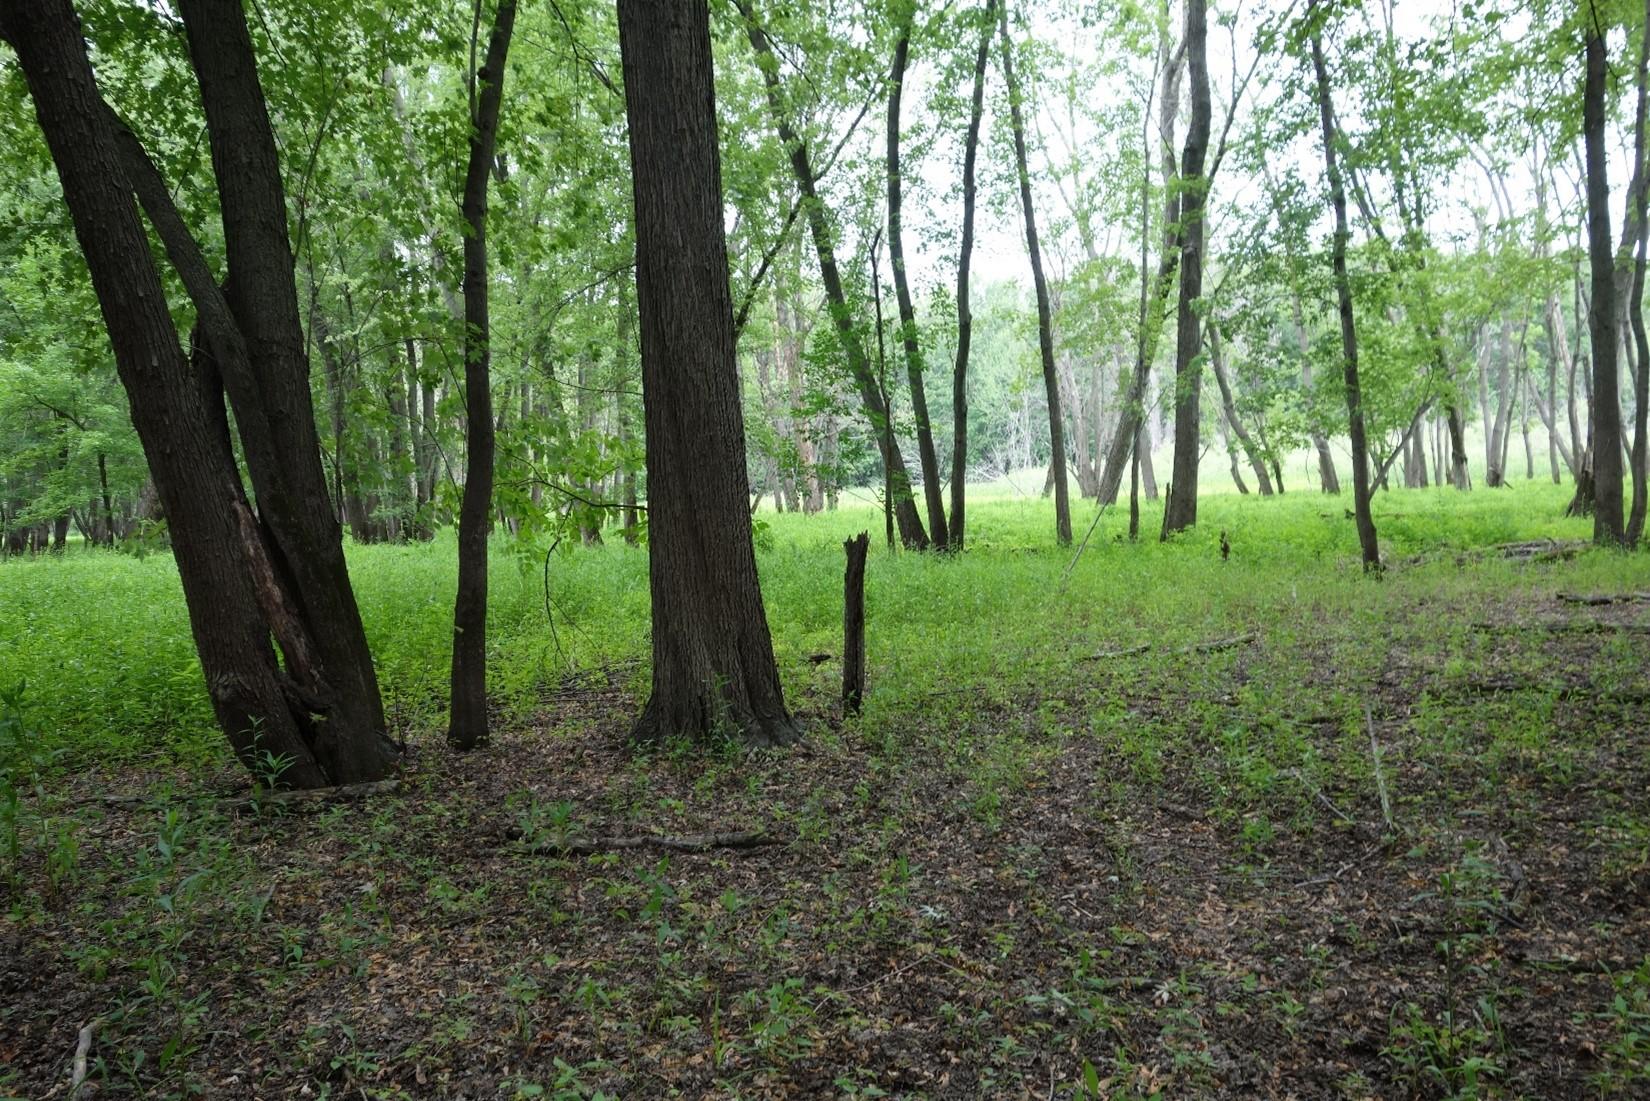 Forested conditions in an unharvested portion of the stand